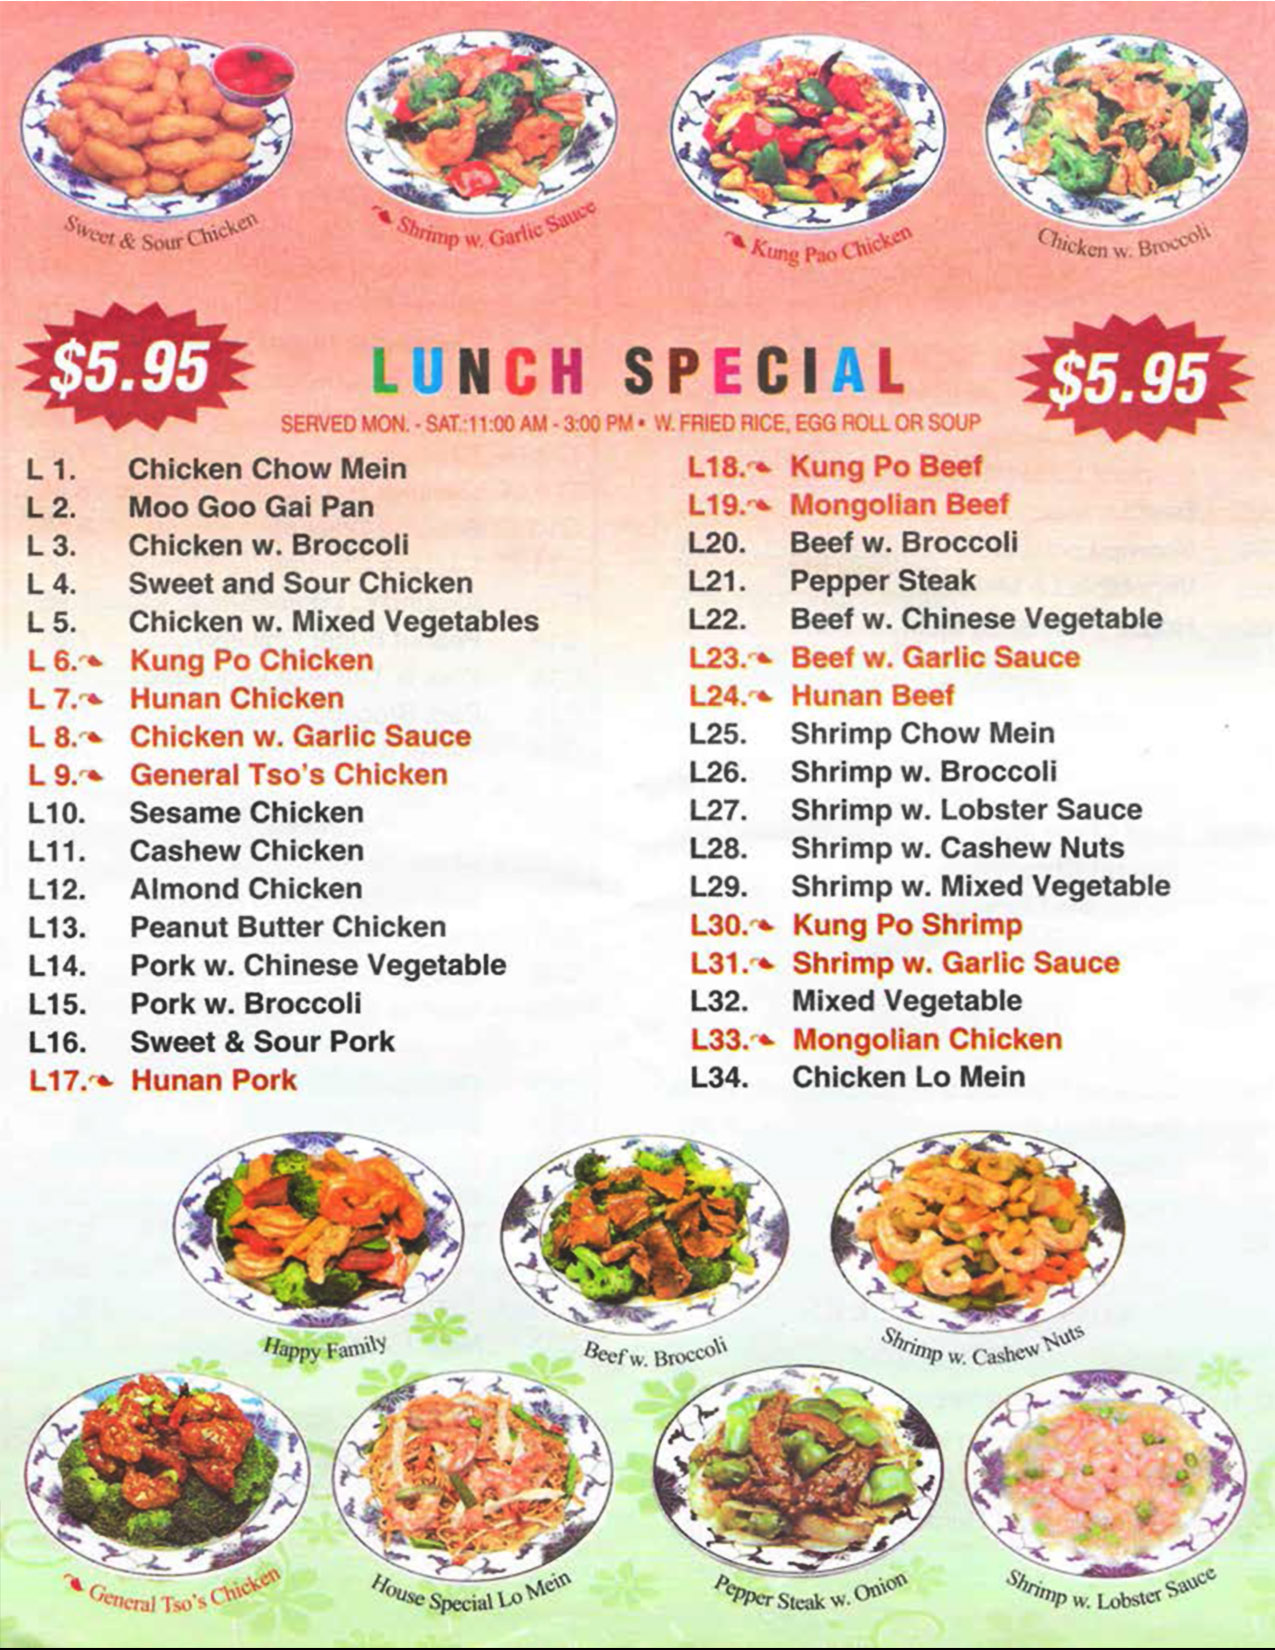 China Wall Chinese Restaurant Menu Lincoln Nebraska - Page 6

LUNCH SPECIAL 
$5.95
SERVED MON.. SAT  11:00 AM - 3:00 PM 
With FRIED RICE, EGG ROLL OR SOUP 
L 1. Chicken Chow Mein 
L 2. Moo Goo Gai Pan 
L 3. Chicken w. Broccoli 
L 4. Sweet and Sour Chicken 
L 5. Chicken w. Mixed Vegetables
L 6. Kung Po Chicken
L 7. Hunan Chicken
L 8. Chicken w. Garlic Sauce
L 9. General Tso's Chicken
L10. Sesame Chicken
L11. Cashew Chicken
L12. Almond Chicken
L13. Peanut Butter Chicken 
L14. Pork w. Chinese Vegetable 
L15. Pork w. Broccoli 
L16. Sweet & Sour Pork
L17. Hunan Pork
L18. Kung Po Beef 
L19. Mongolian Beef 
L20. Beef w. Broccoli
L21. Pepper Steak  
L22. Beef w. Chinese Vegetable .
L23. Beef w. Garlic Sauce  
L24. Hunan Beef  
L25. Shrimp Chow Mein  
L26. Shrimp w. Broccoli  
L27. Shrimp w. Lobster Sauce  
L28. Shrimp w. Cashew Nuts  
L29. Shrimp w. Mixed Vegetable 
L30. Kung Po Shrimp 
L31. Shrimp w. Garlic Sauce 
L32. Mixed Vegetable  
L33. Mongolian Chicken 
L34. Chicken Lo Mein